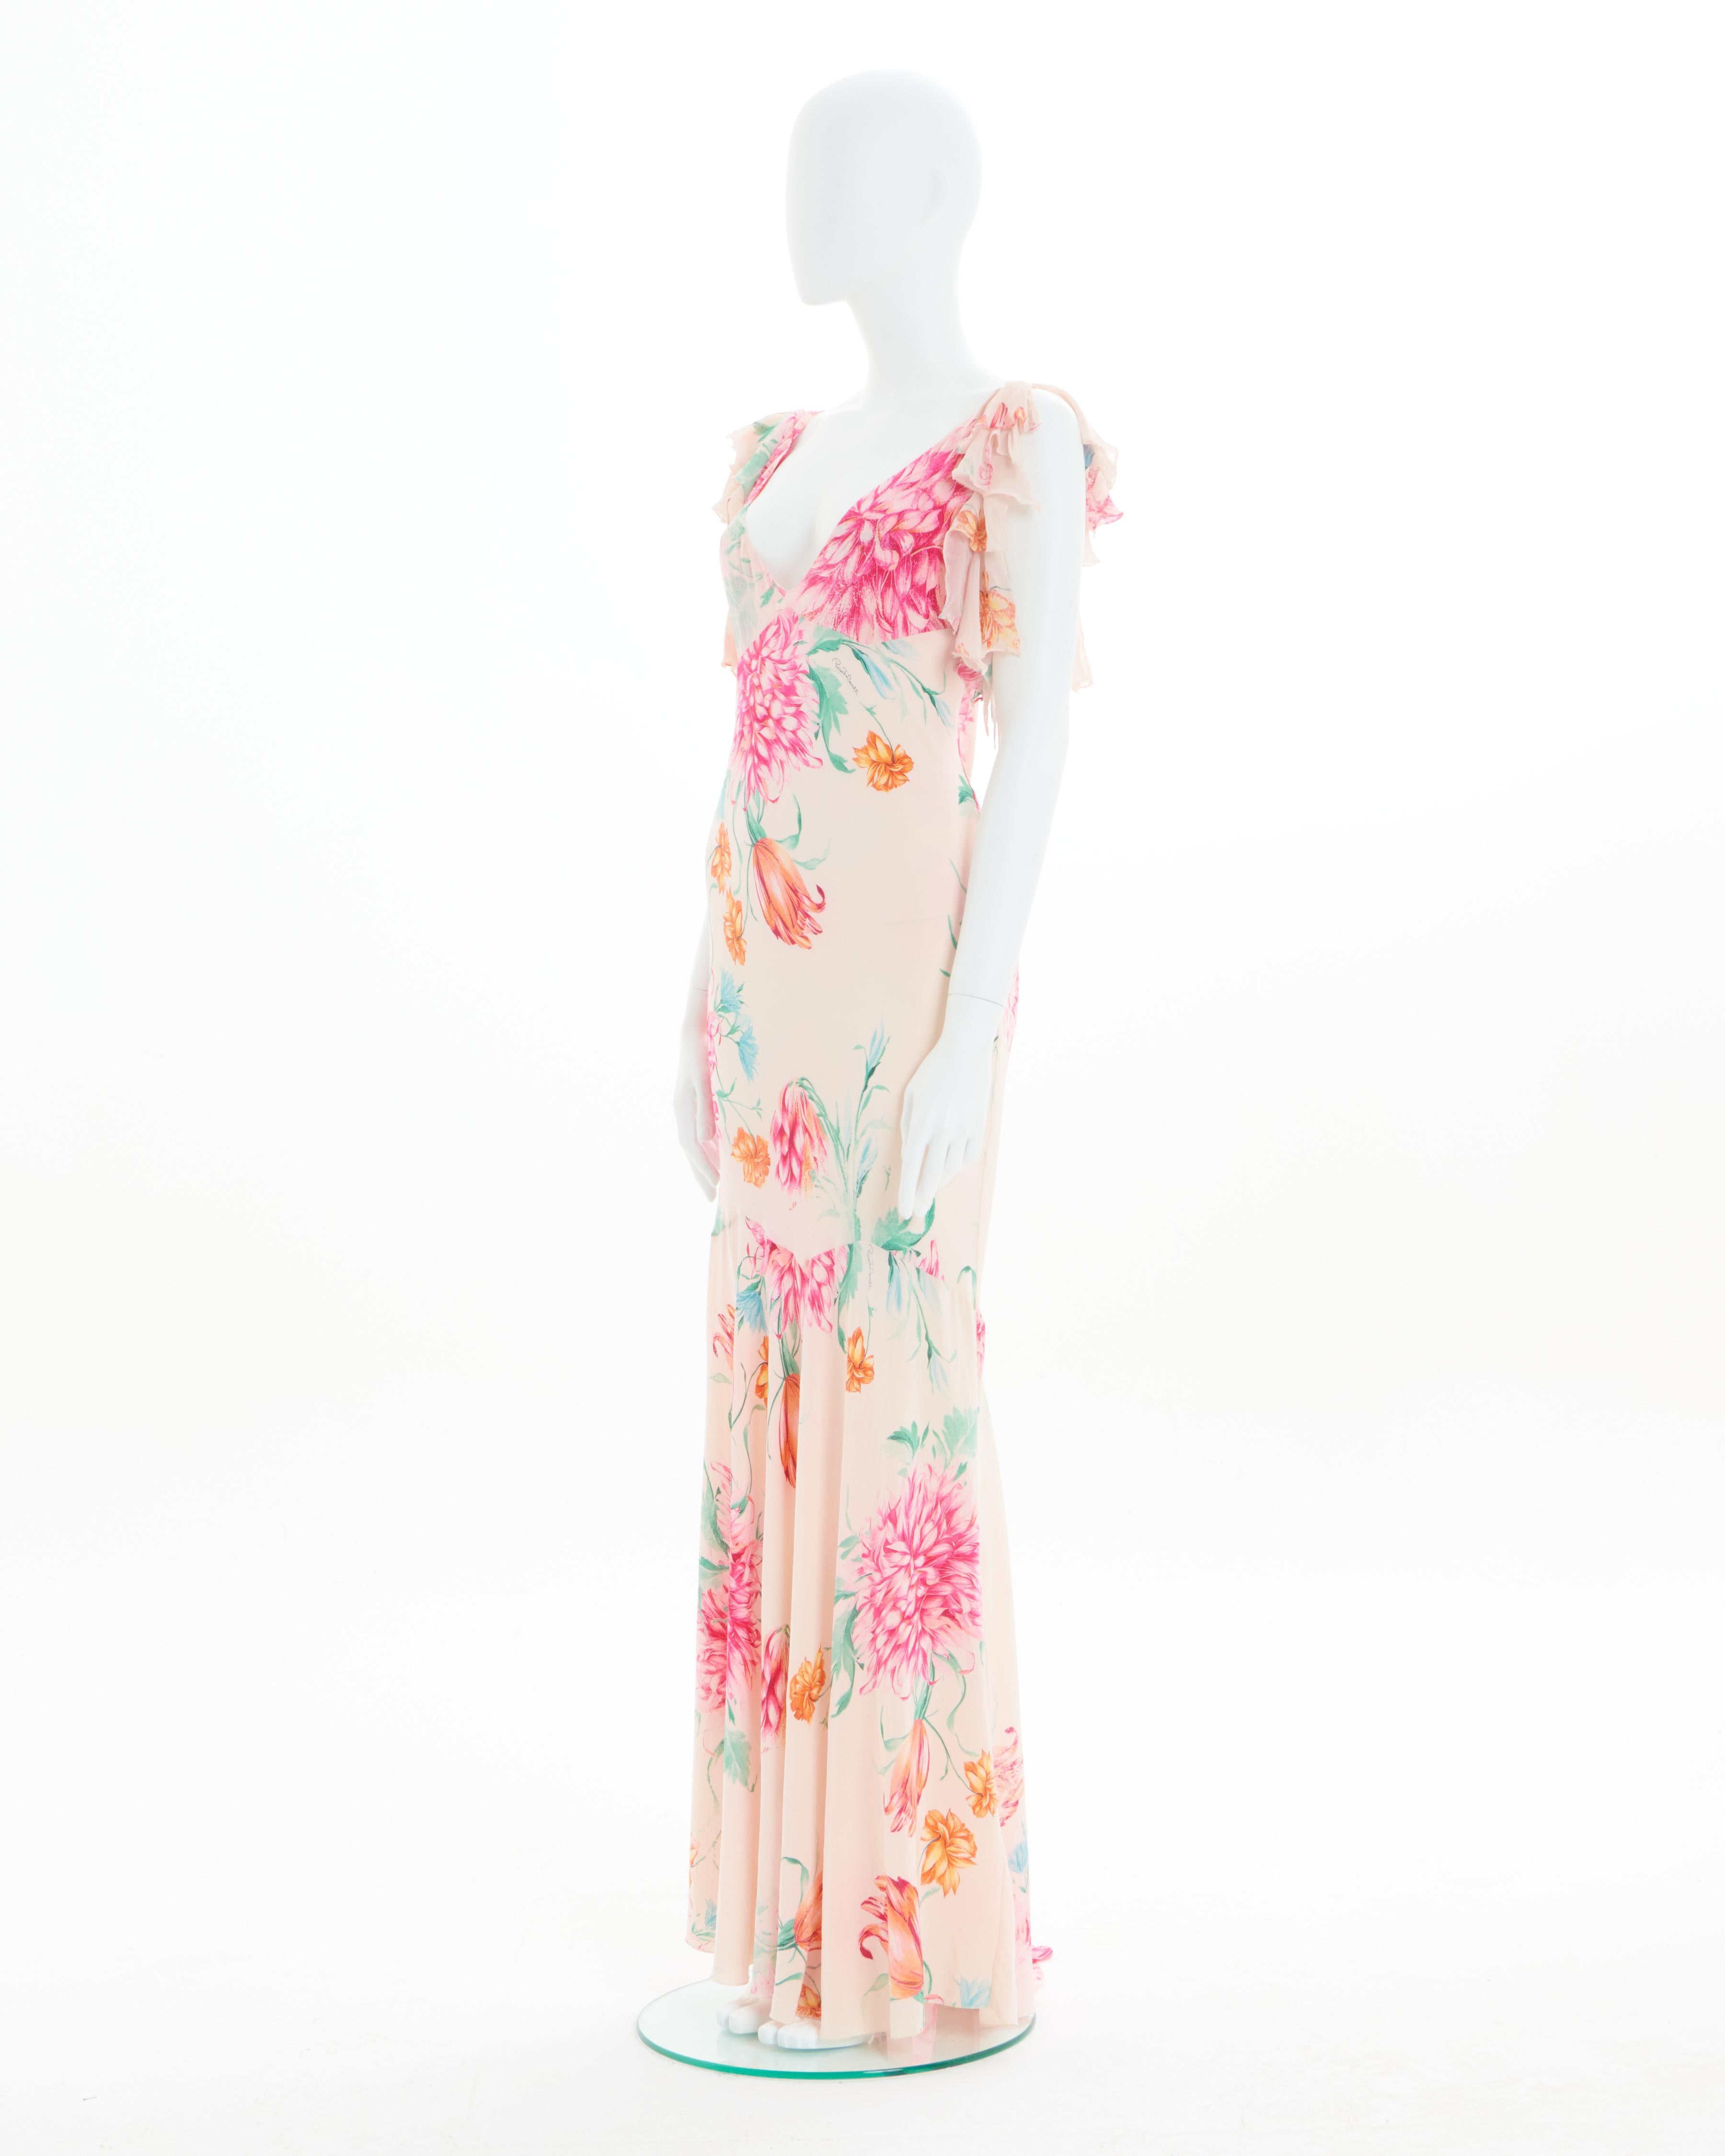 - Roberto Cavalli
- Sold by Skof.Archive
- Spring - Summer 2002 
- Luxurious light silk and features a vibrant floral pattern with pink and orange flowers complemented by hints of green leaves
- Frilled sleeves
- Crafted from luxurious bias-cut